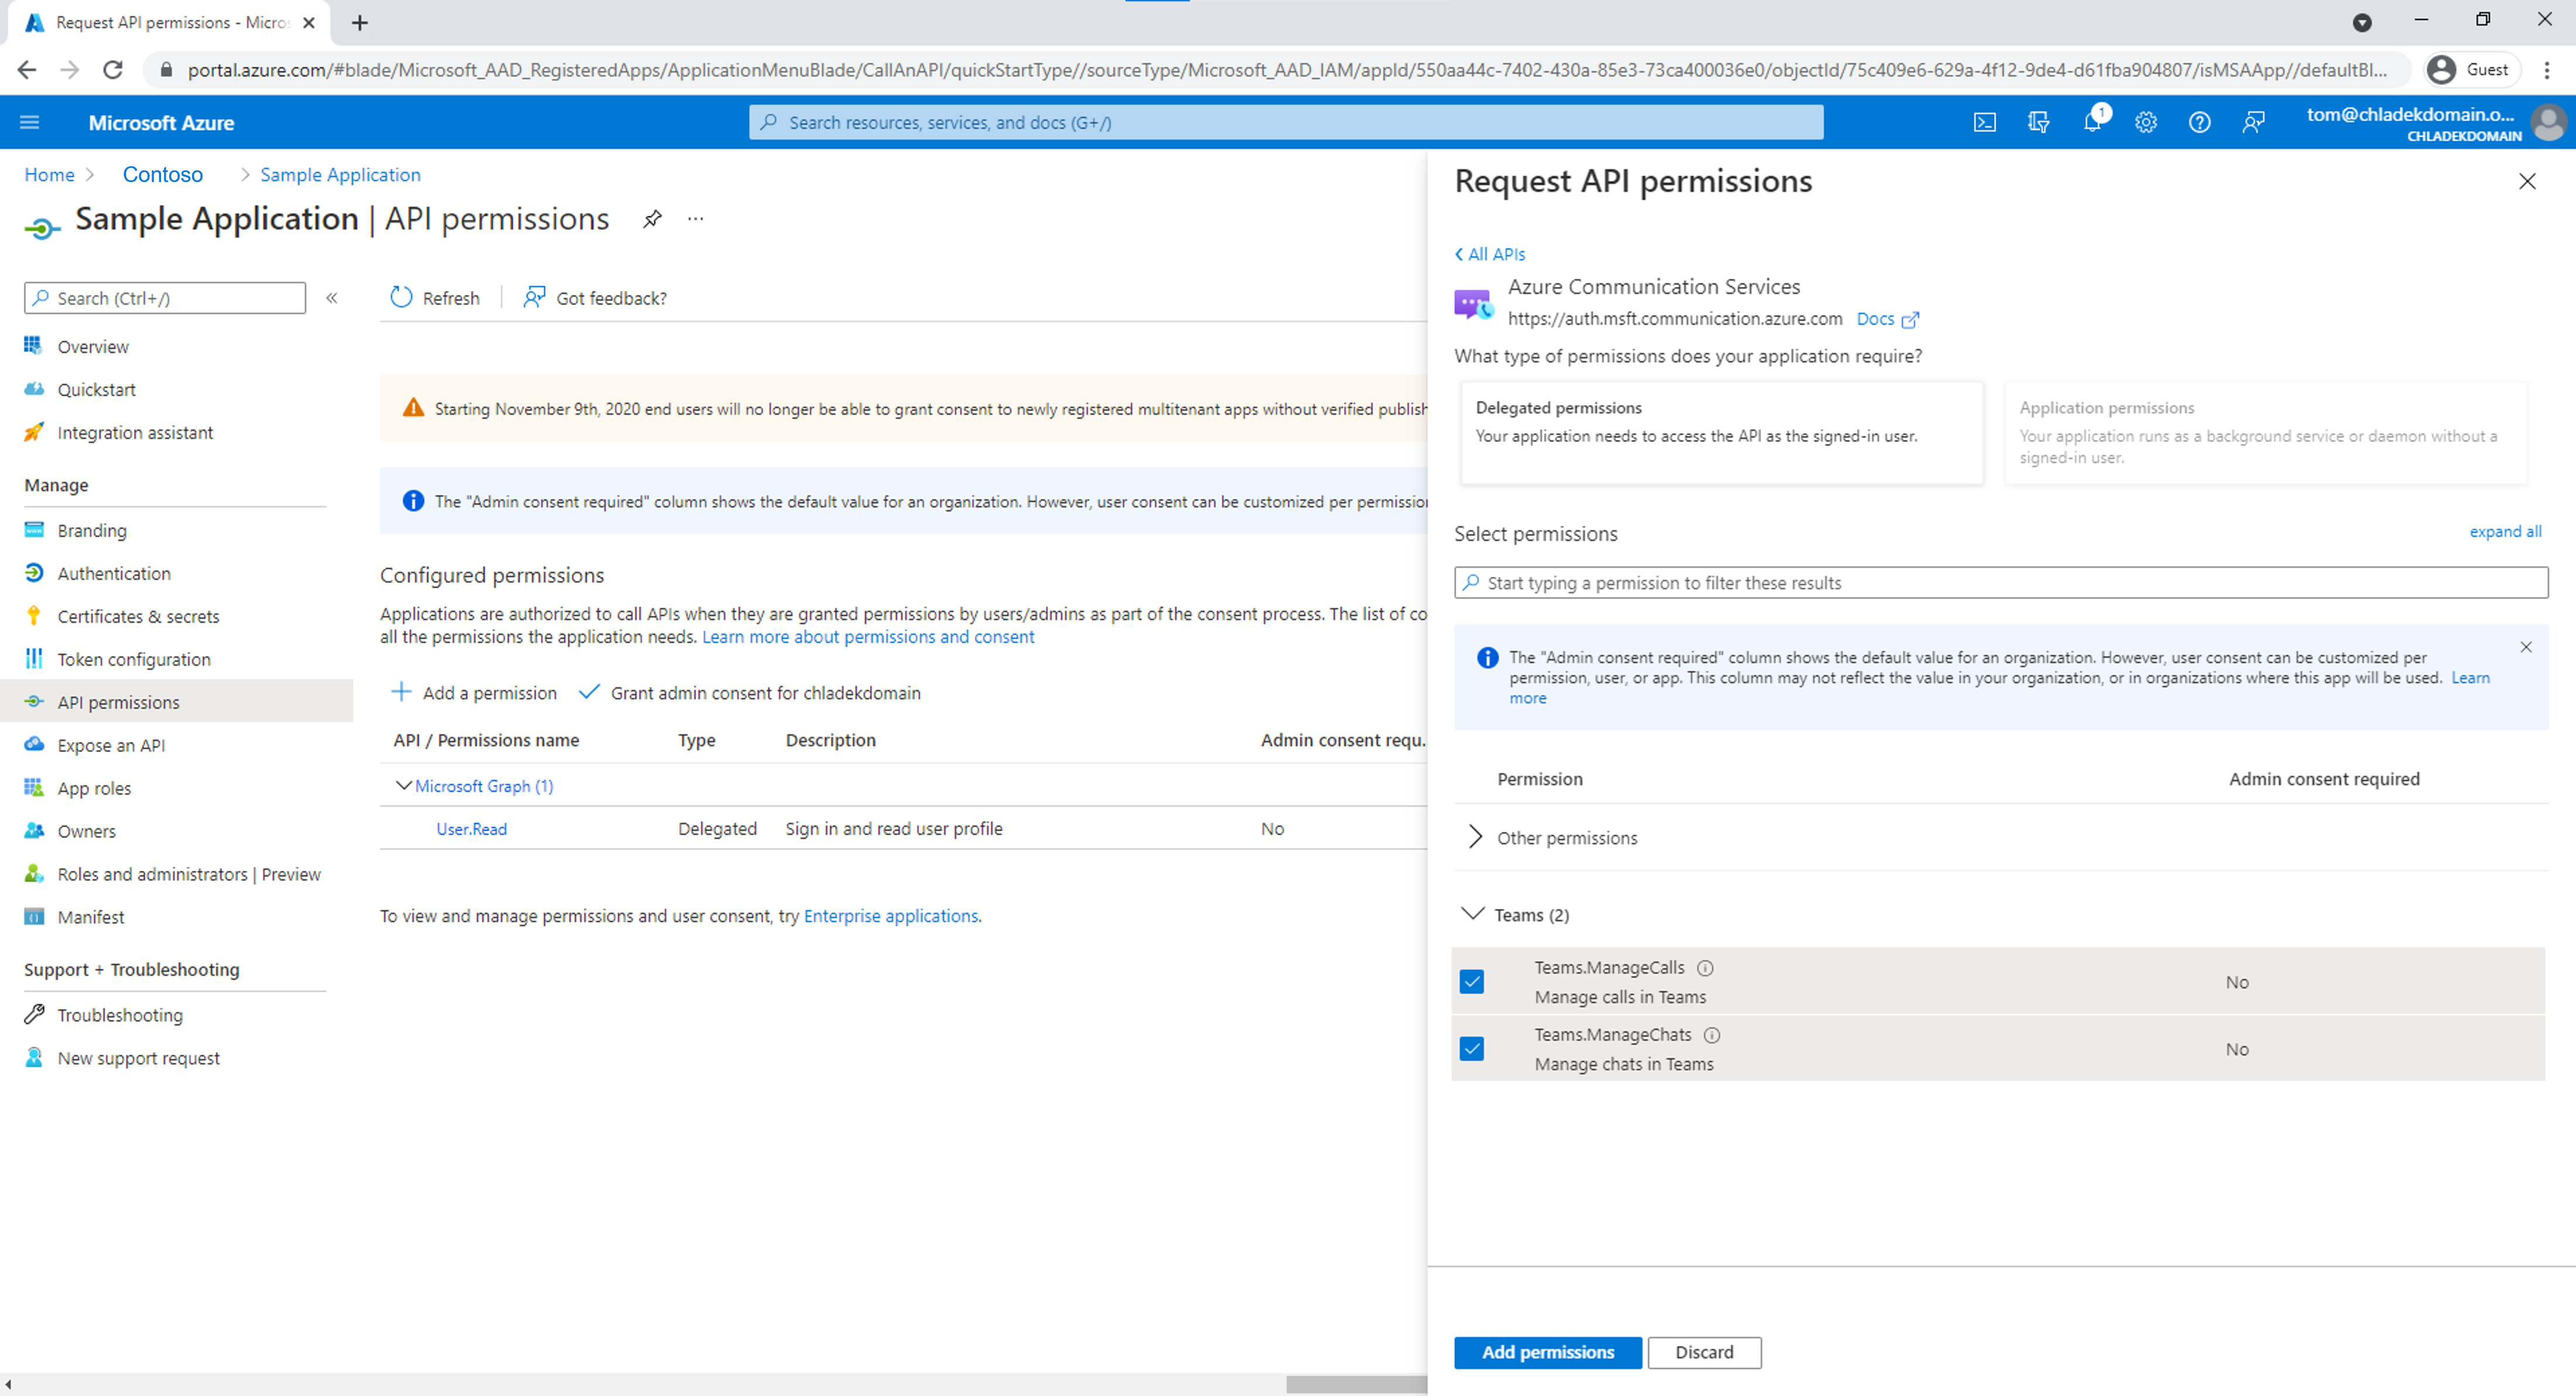 Add Teams.ManageCalls and Teams.ManageChats permission to the Microsoft Entra application created in previous step.